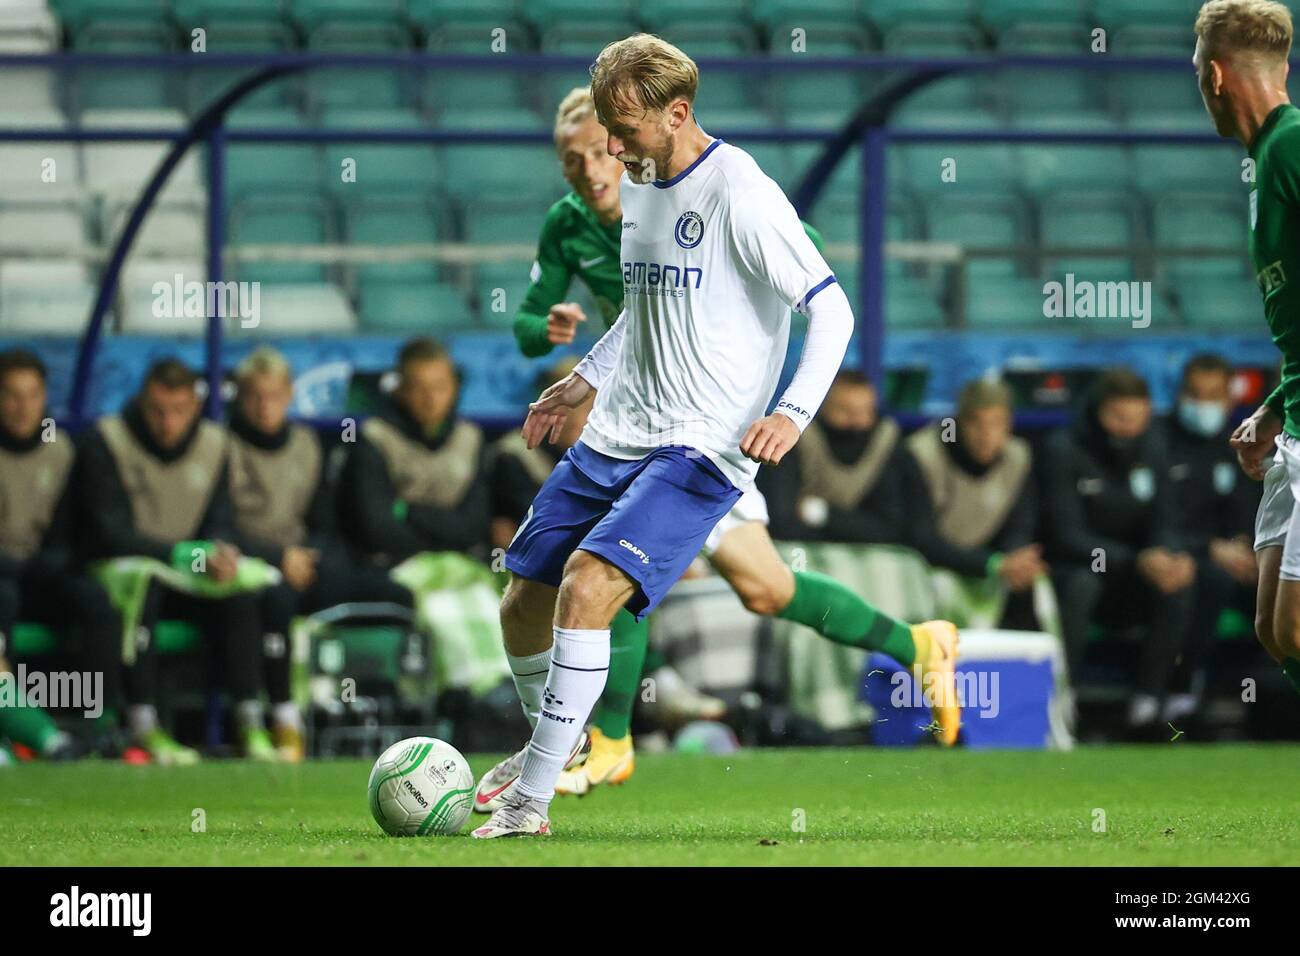 Gent's Roman Bezus pictured in action during a soccer game between Estonian FC Flora Tallinn and Belgian KAA Gent, Thursday 16 September 2021 in Talli Stock Photo